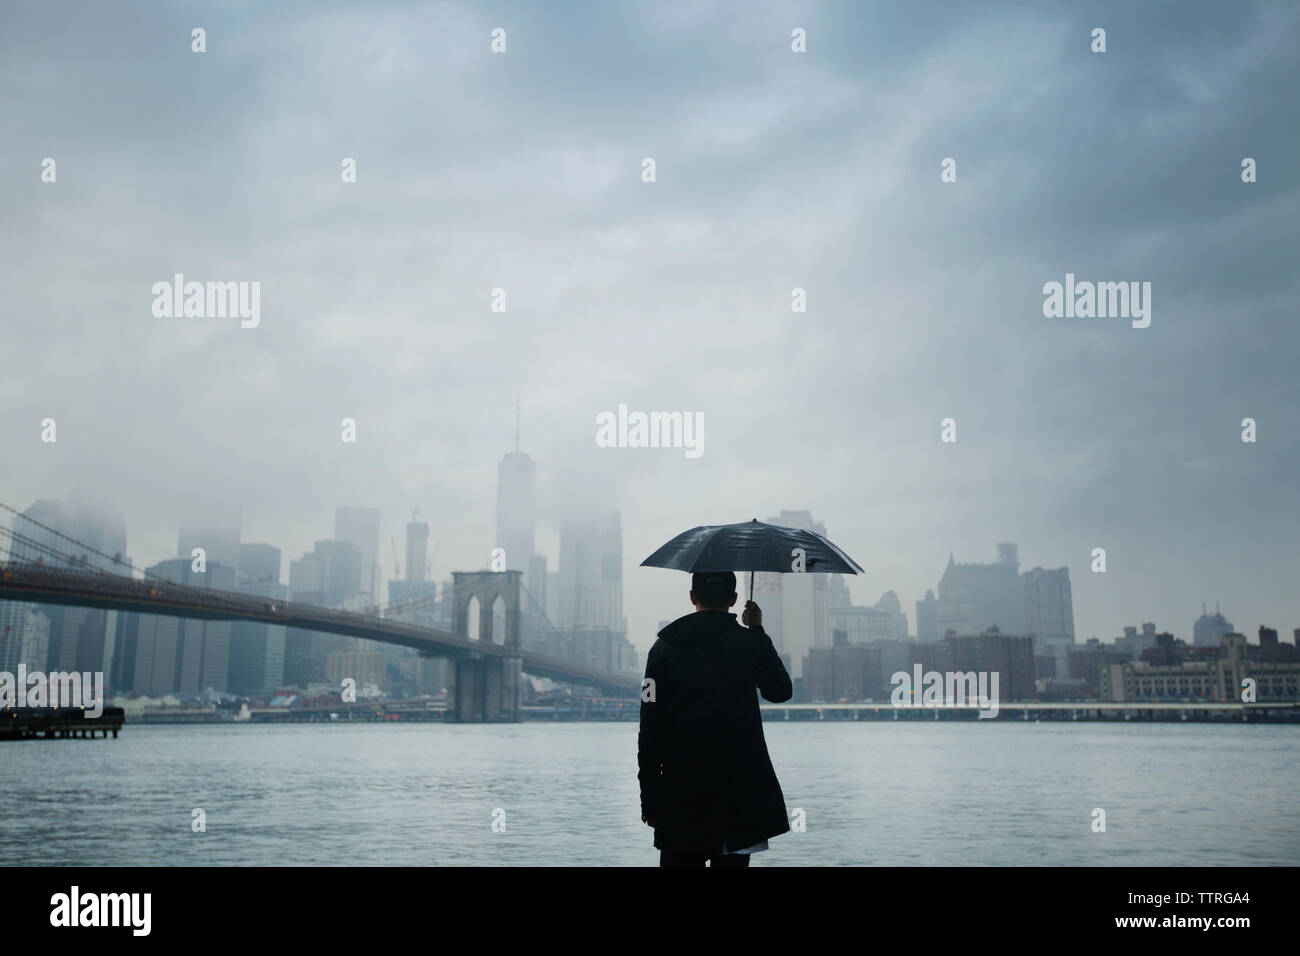 Rear view of man holding umbrella while looking at city view against cloudy sky Stock Photo